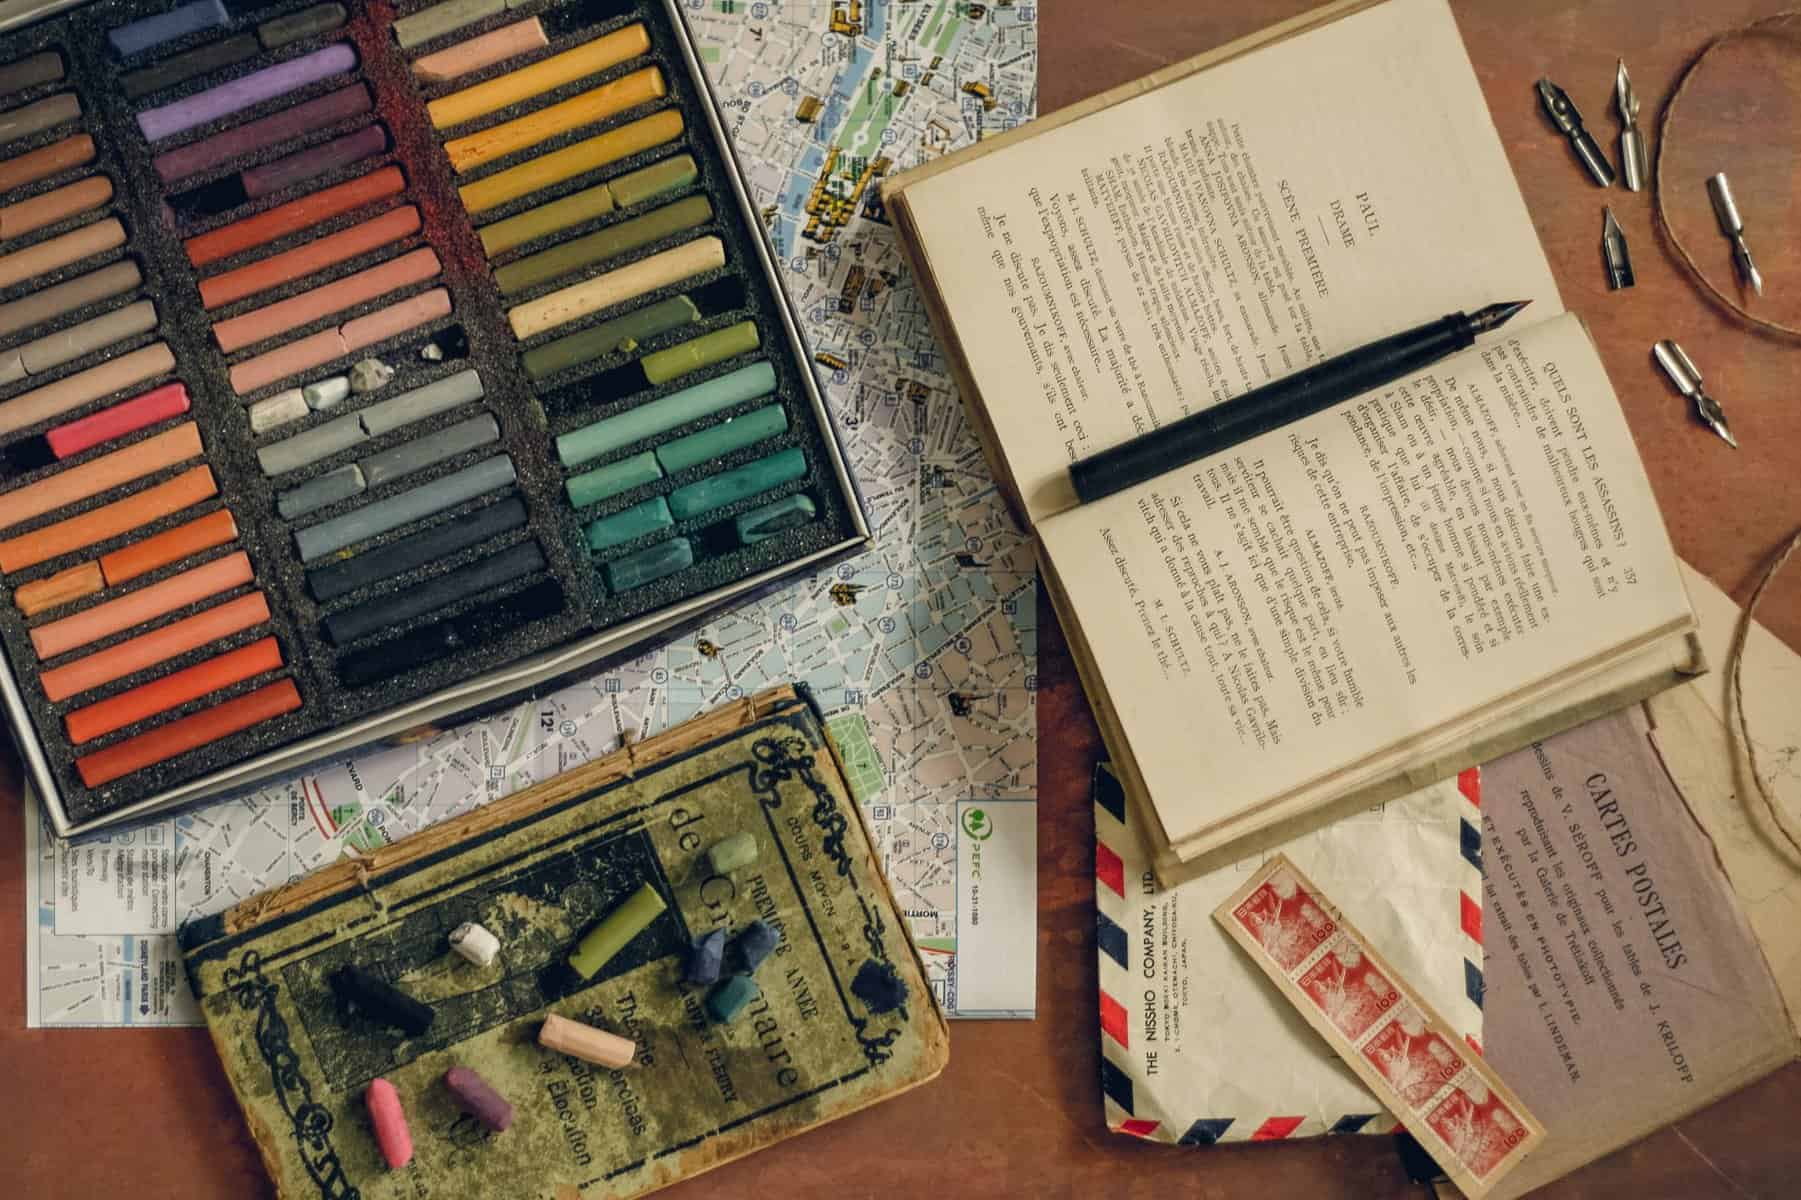 A collection of art supplies including a notebook and pastels.